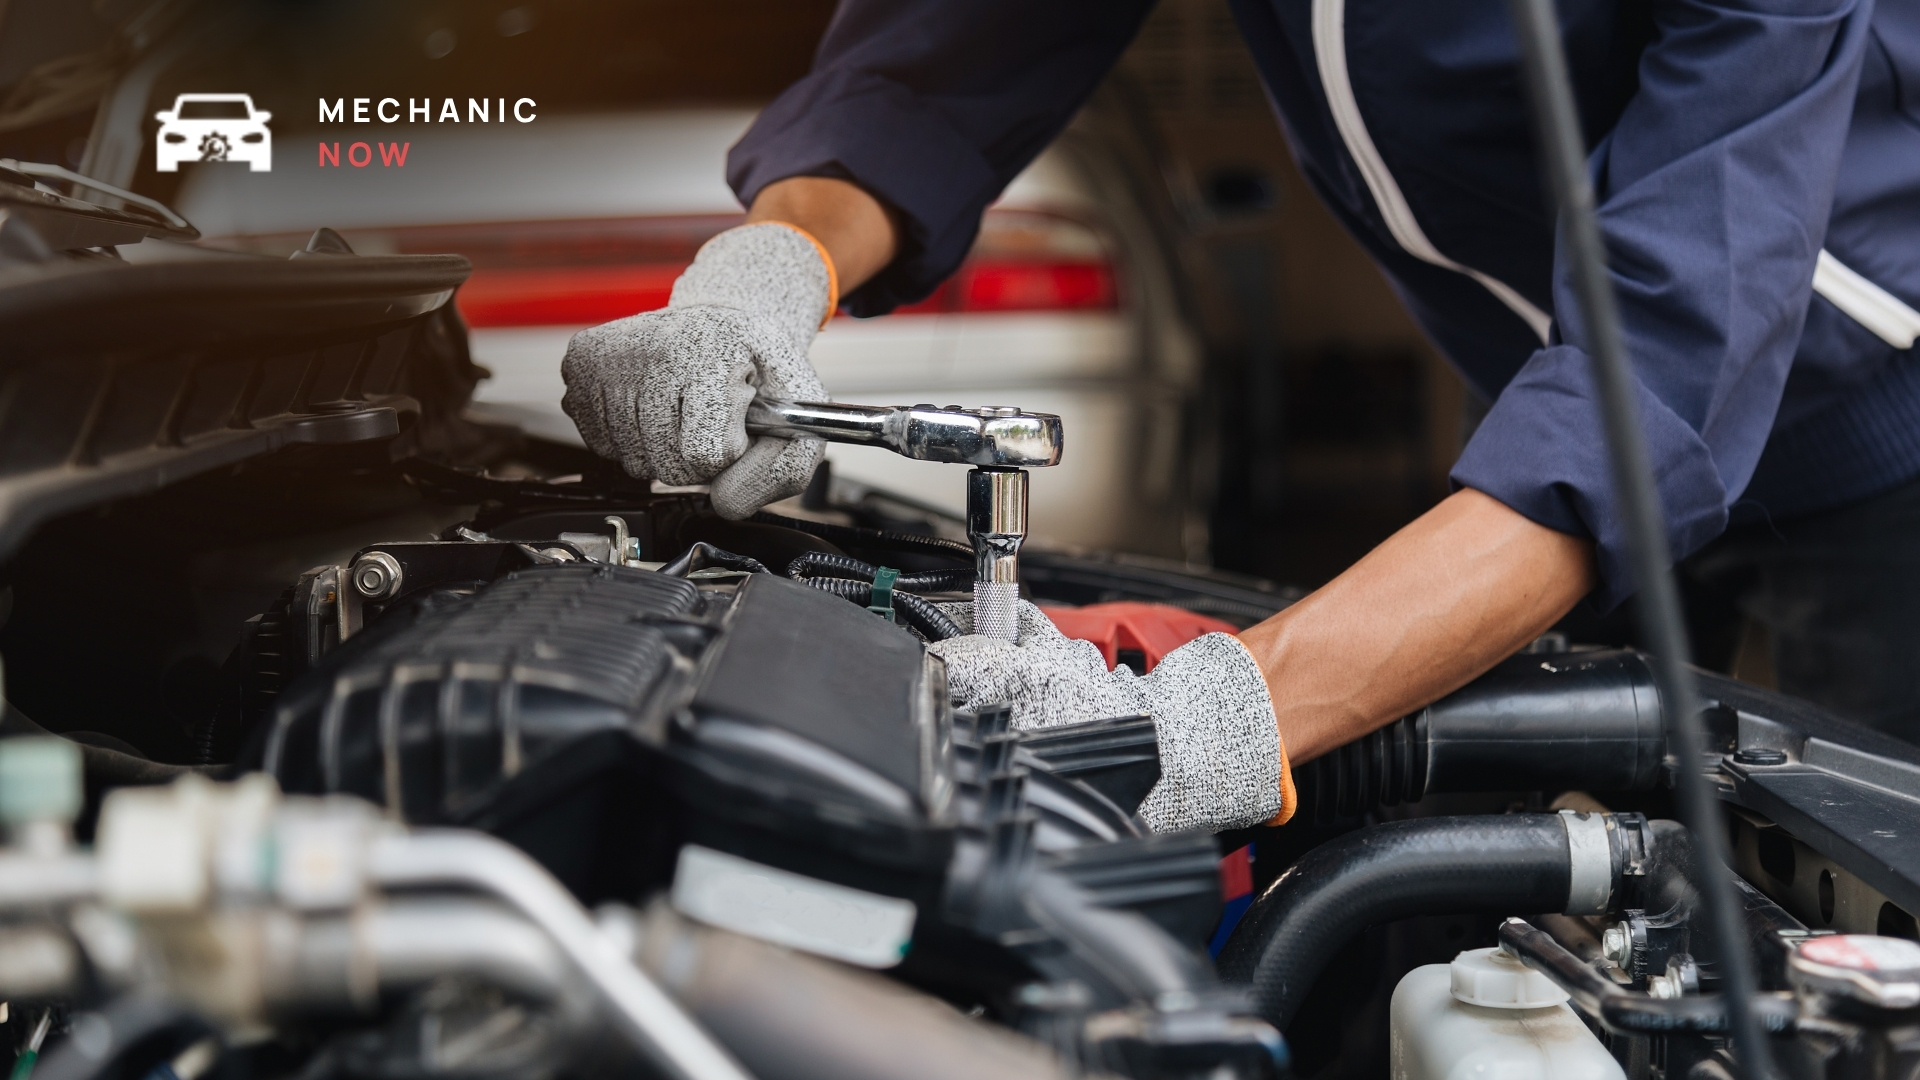 Mechanic Now | Trusted Car Mechanics for Best Car Services